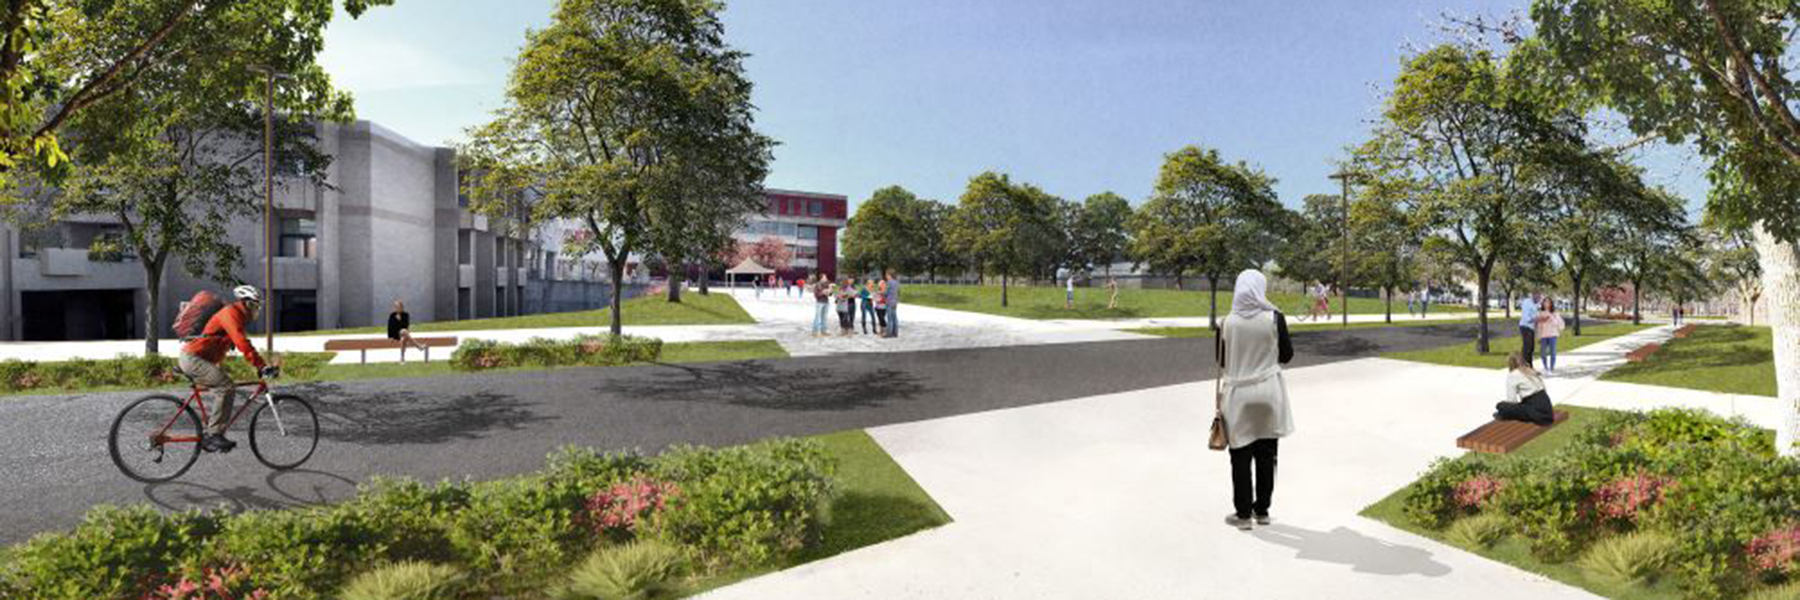 Artist rendering of students crossing street with nice landscaping